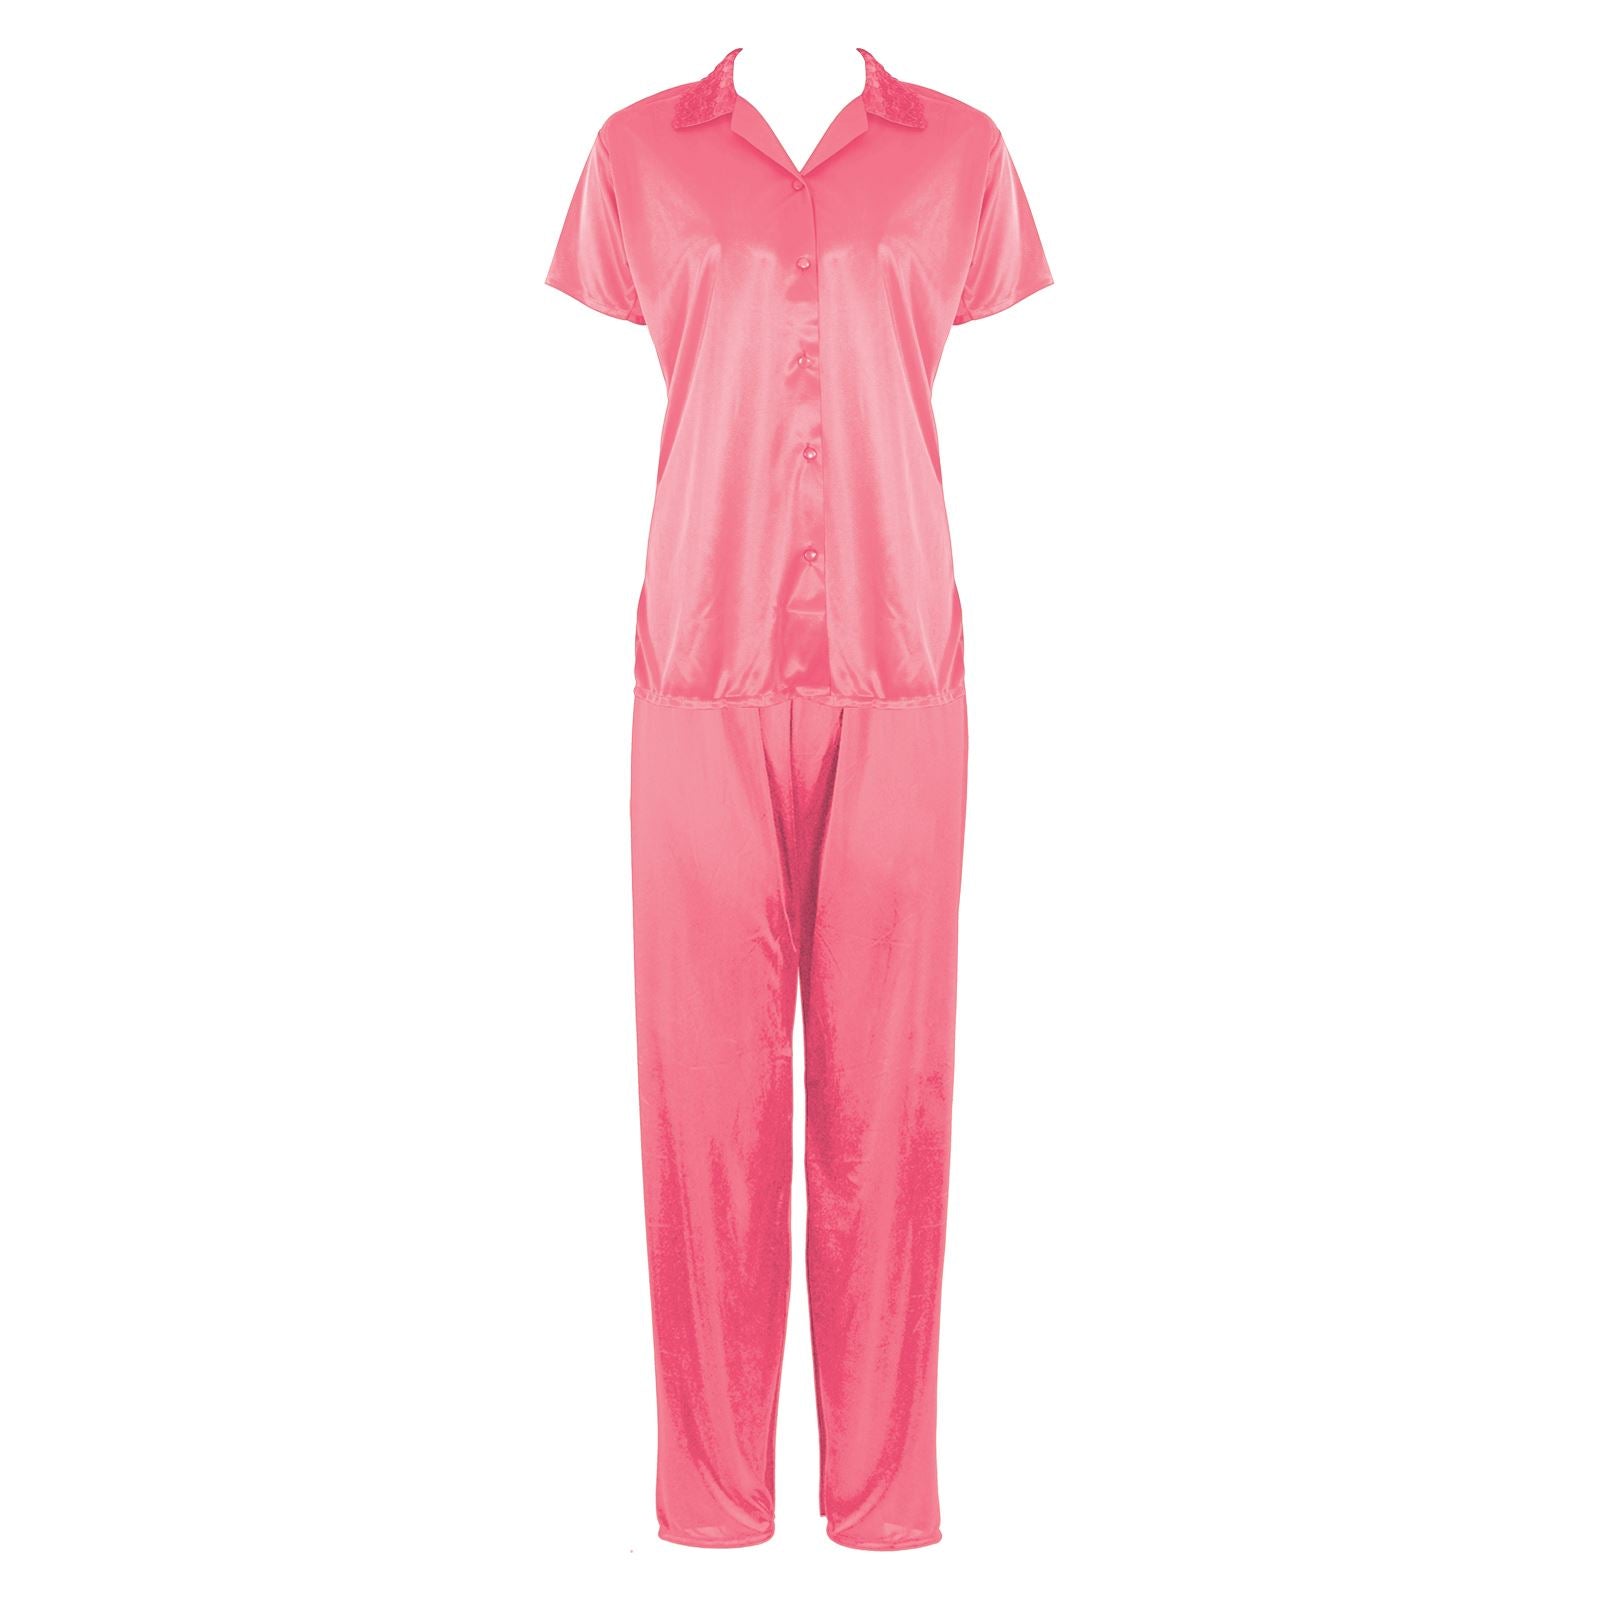 Coral Pink / One Size Satin Pyjama Set With Bedroom Sleepers The Orange Tags